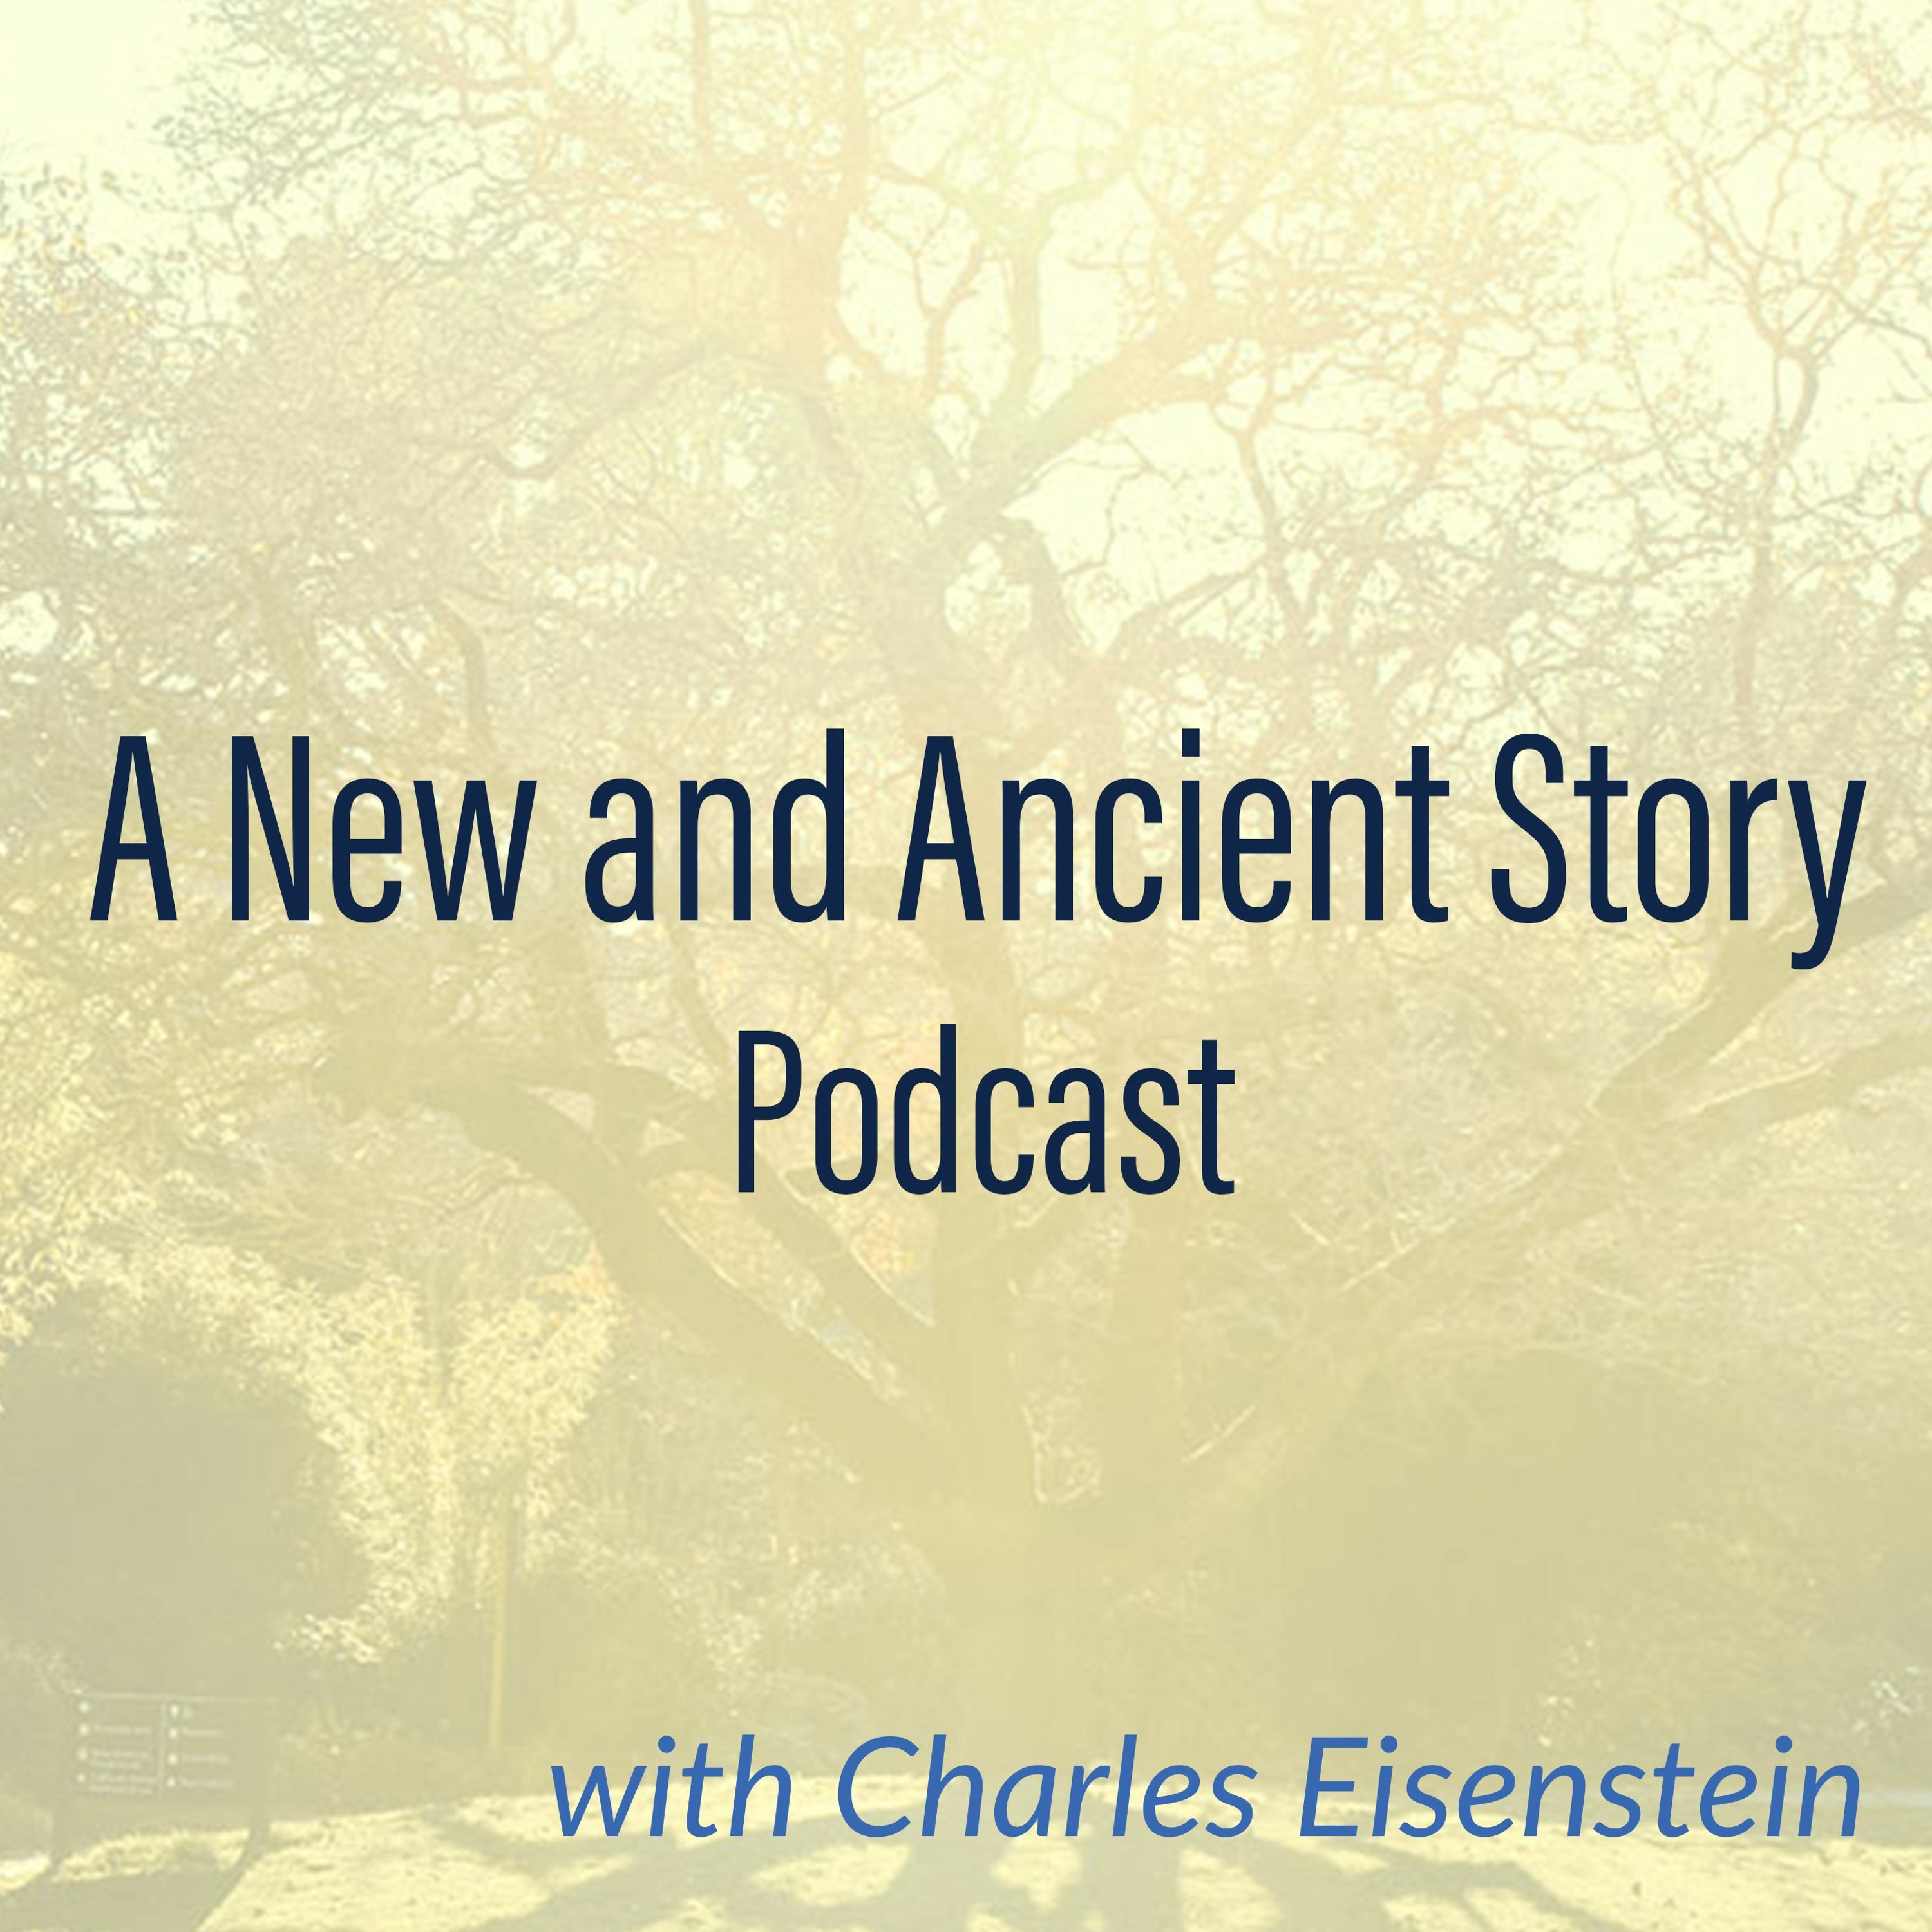 Carol Bowman: Three Stories (E12) - A New and Ancient Story